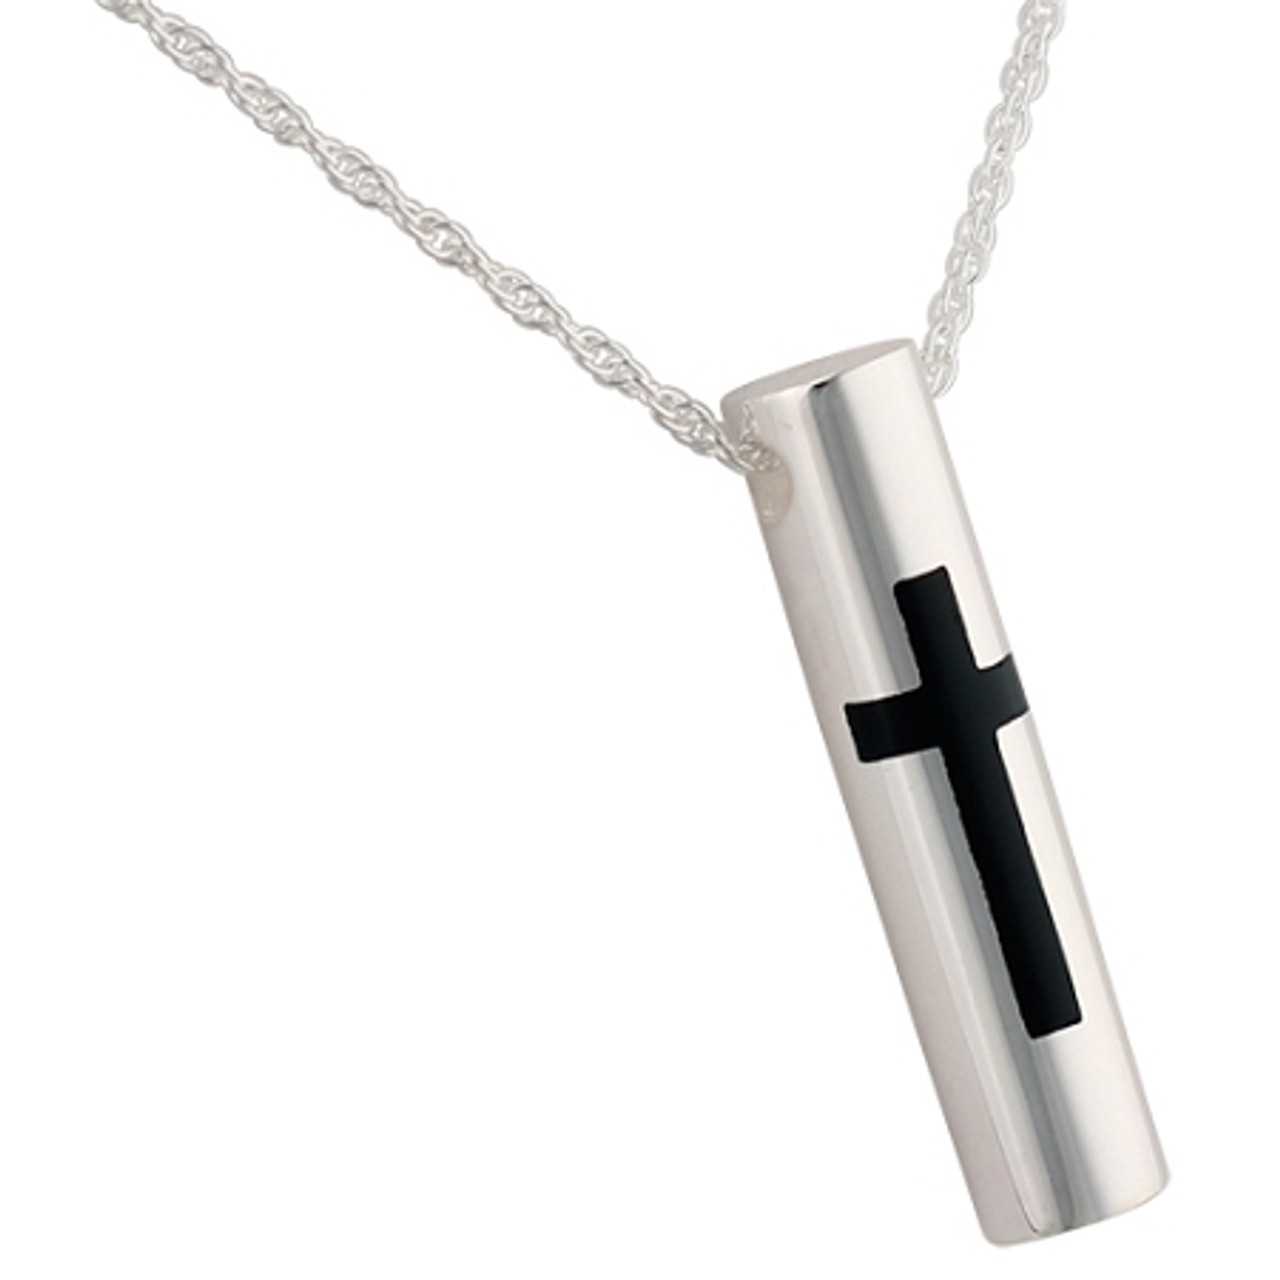 Cylinder with Black Cross Pendant and Necklace for Cremation Ashes